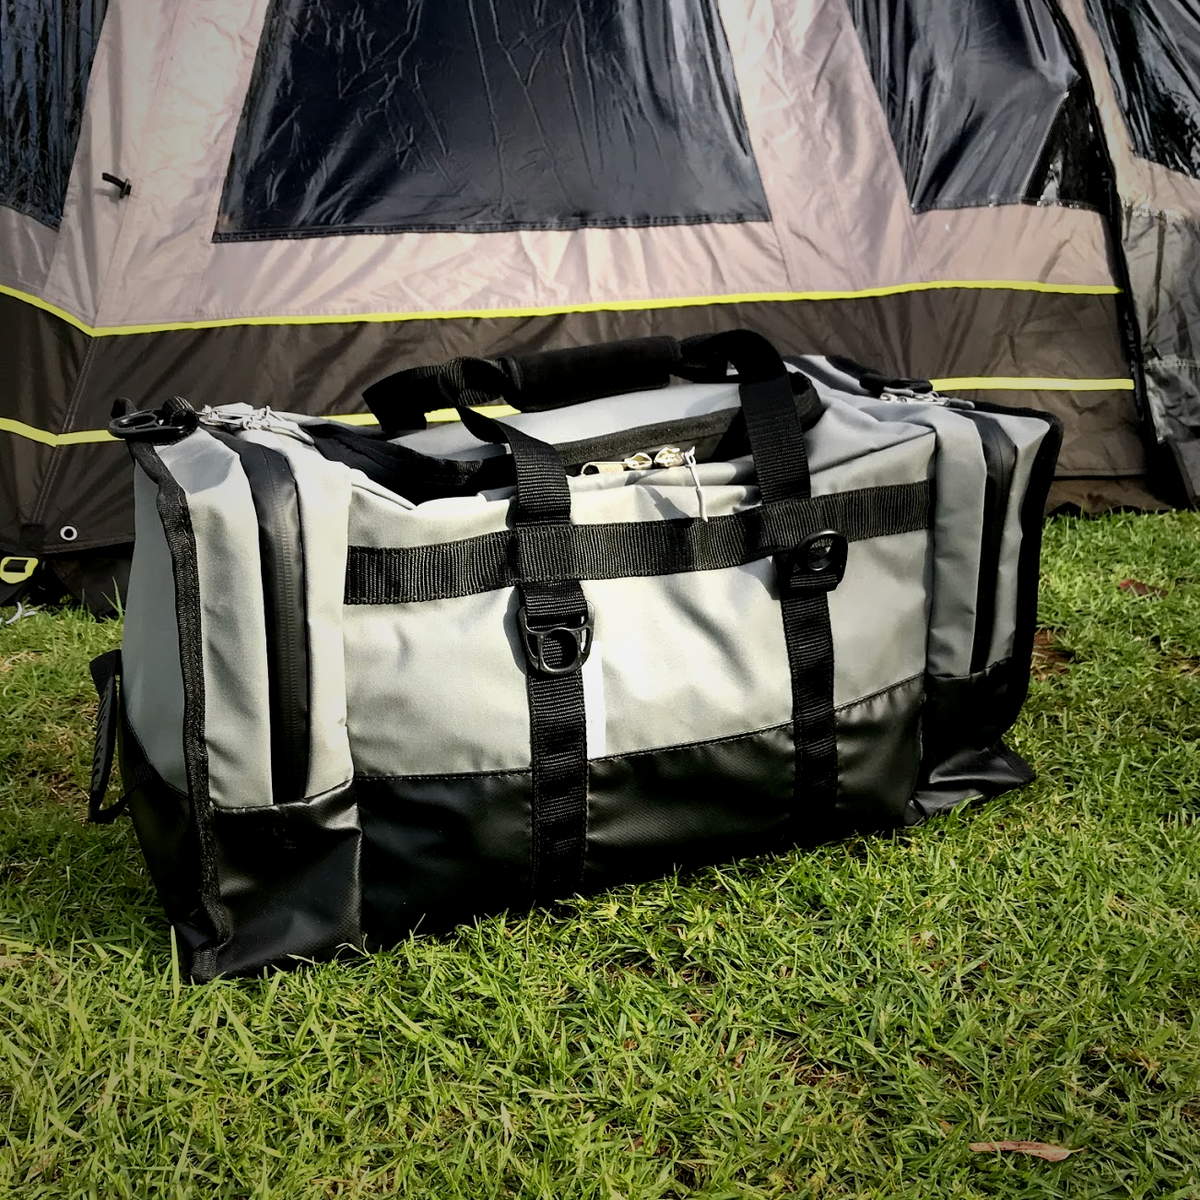 x2 Canvas Camping Bag by Outcamp